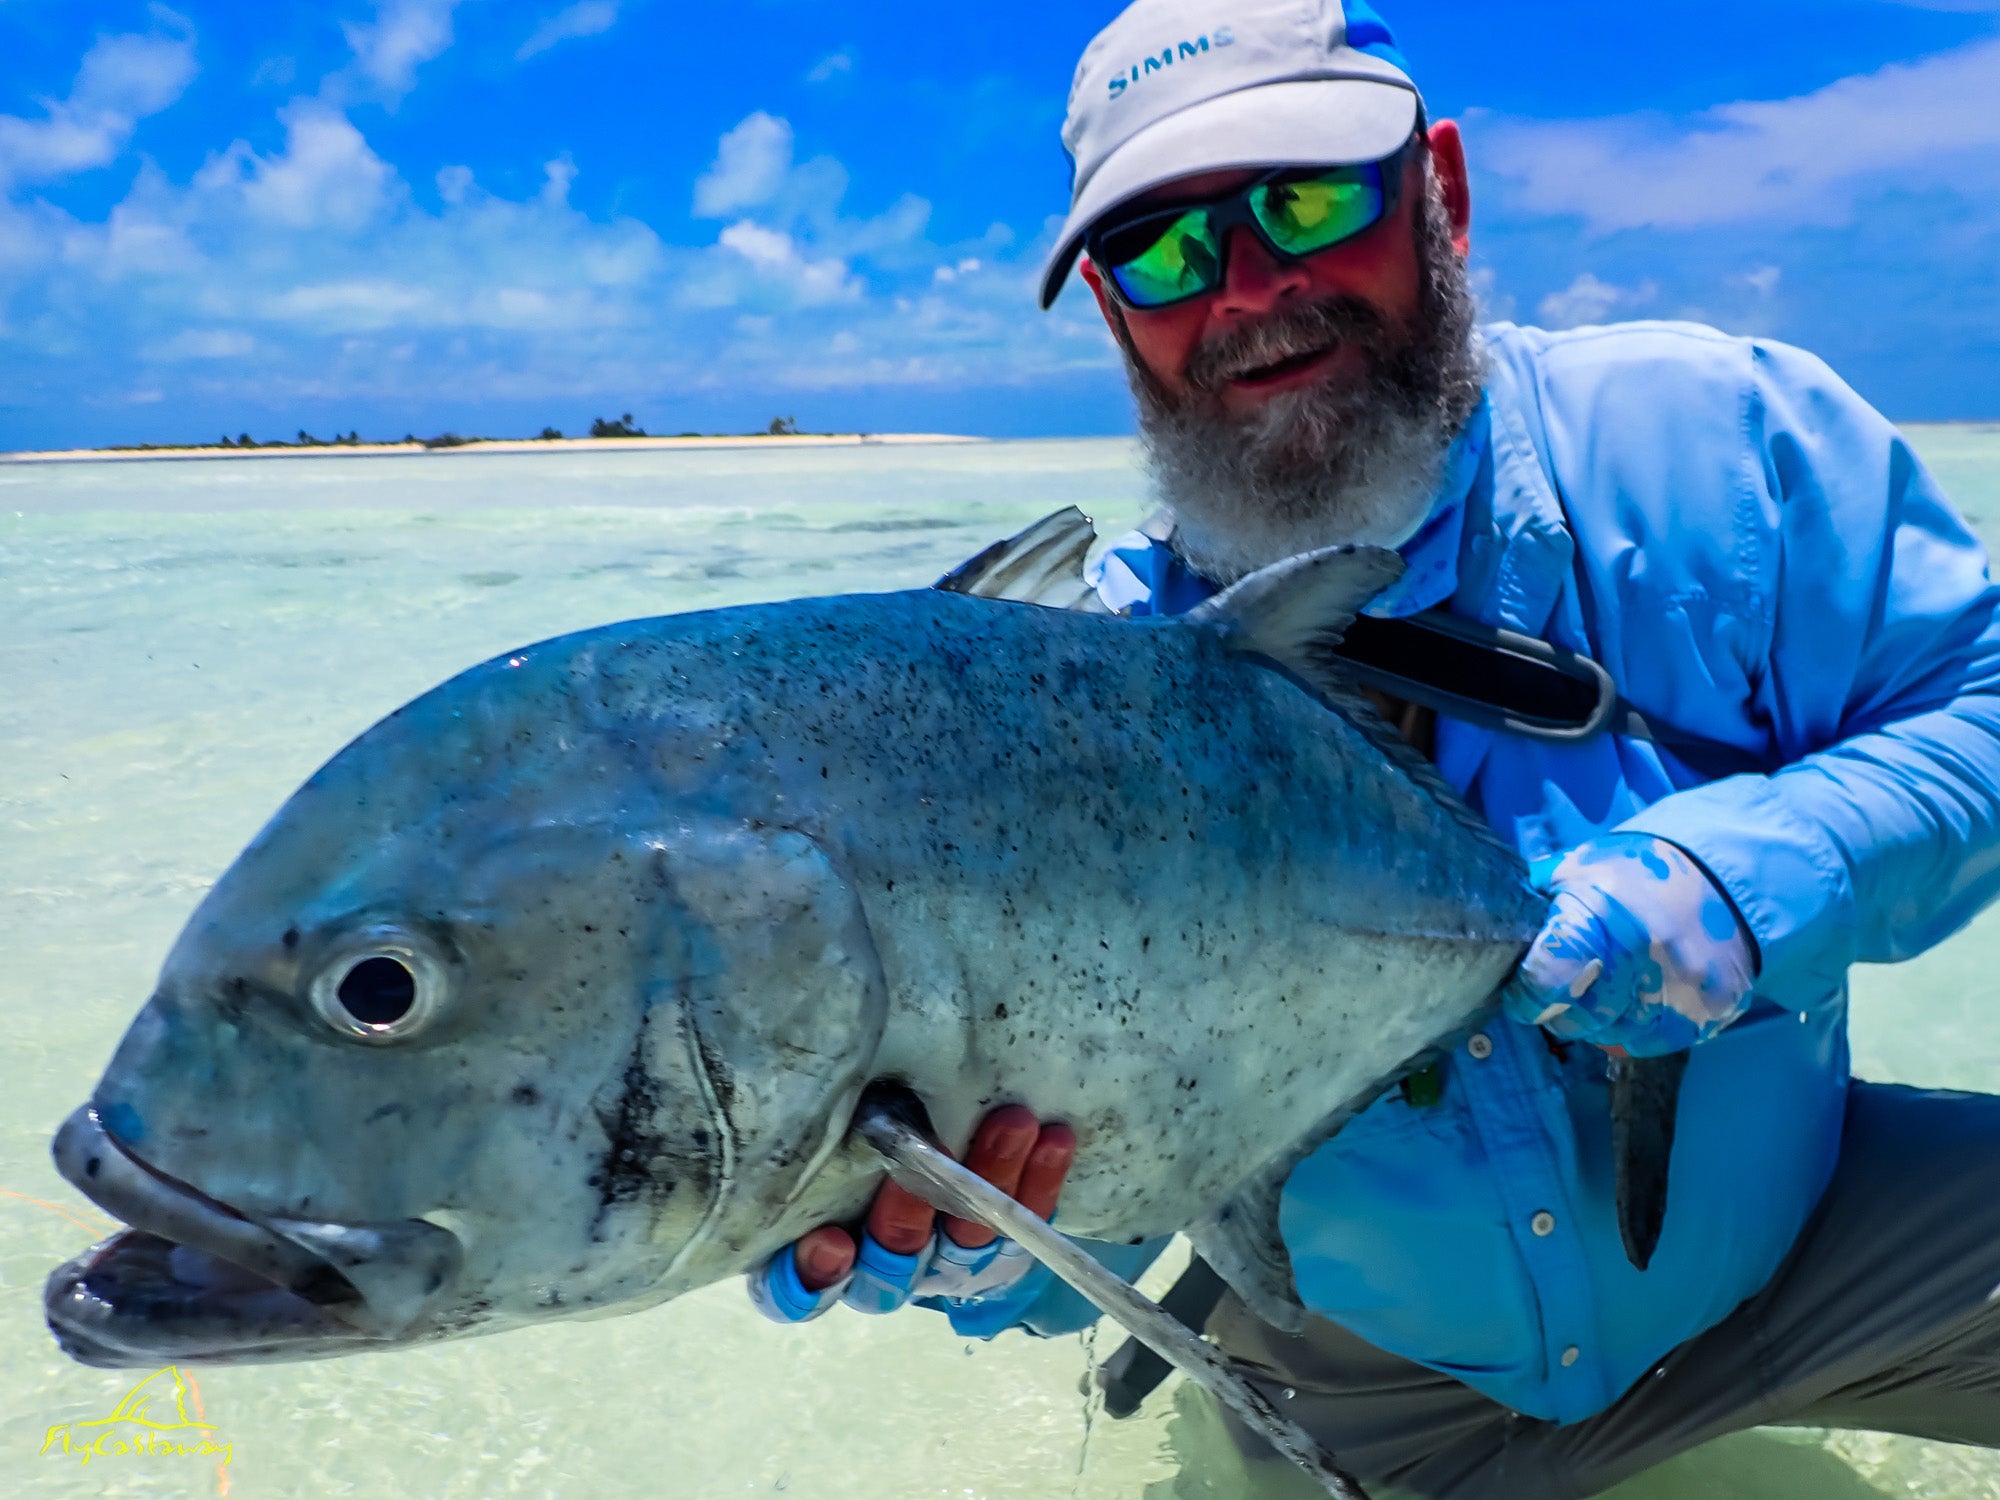 FLY FISHING FOR GIANT TREVALLY